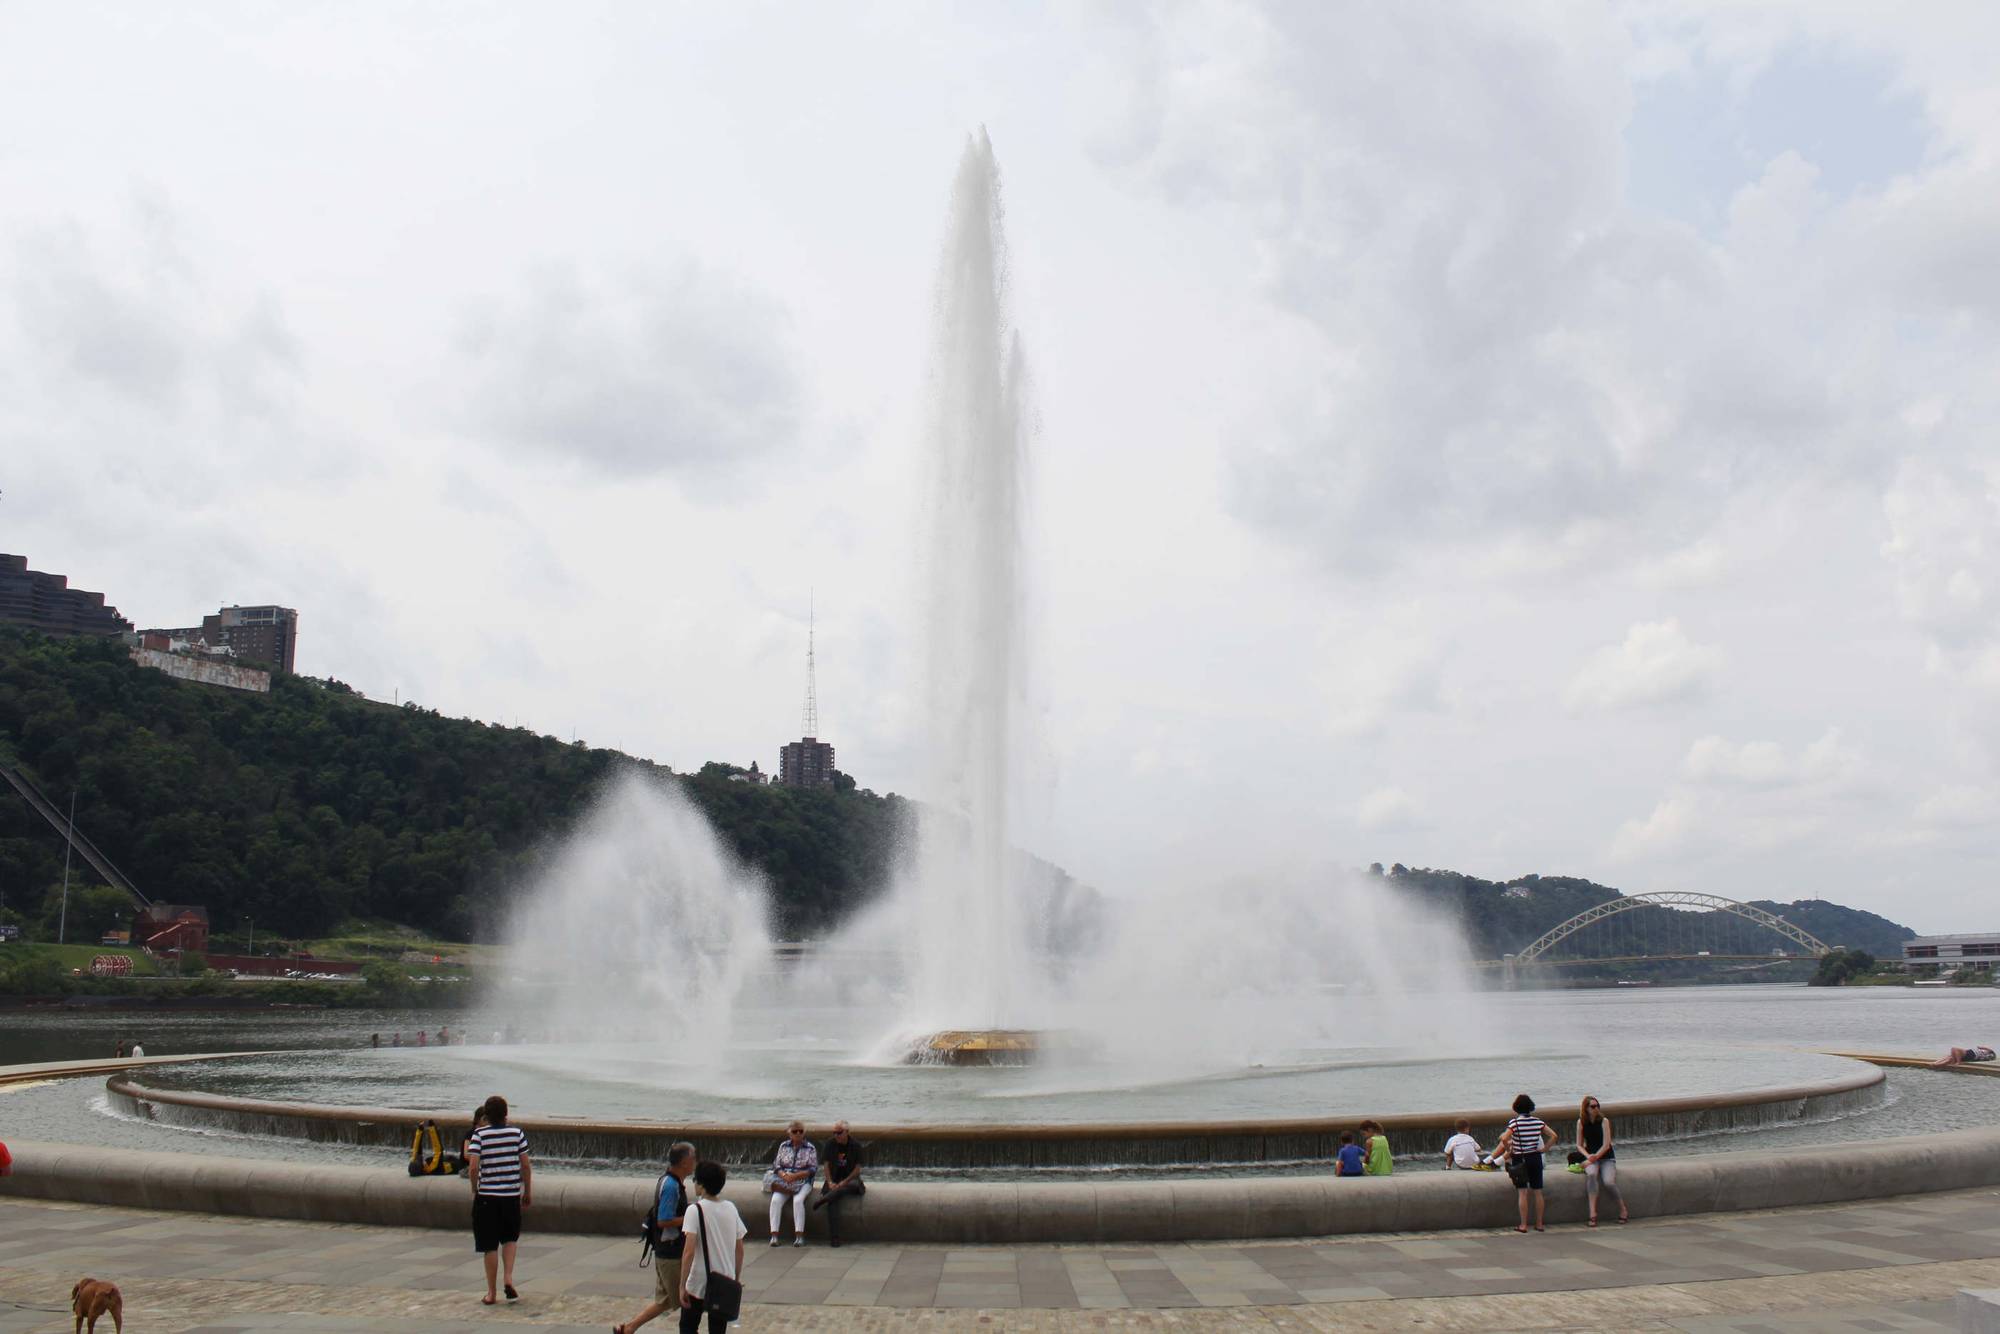 A large photo of the central water fountain